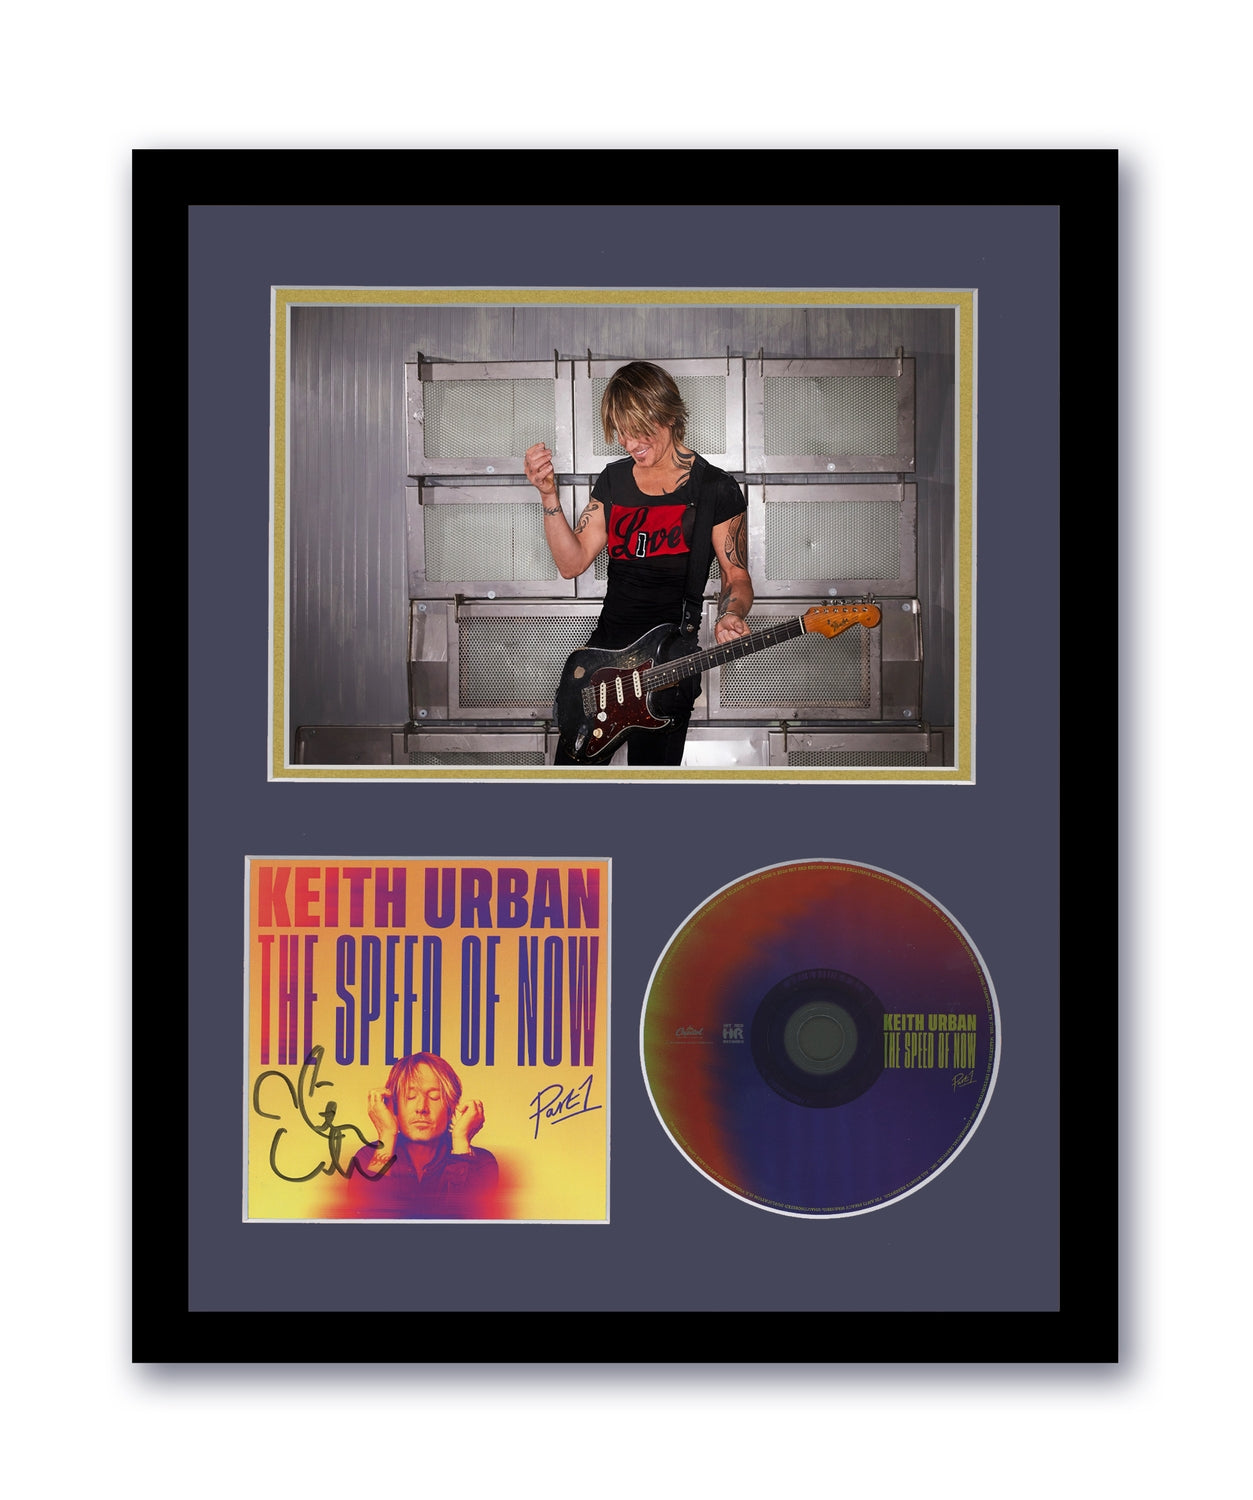 Keith Urban Autographed Signed 11x14 Framed CD Speed Of Now ACOA 3